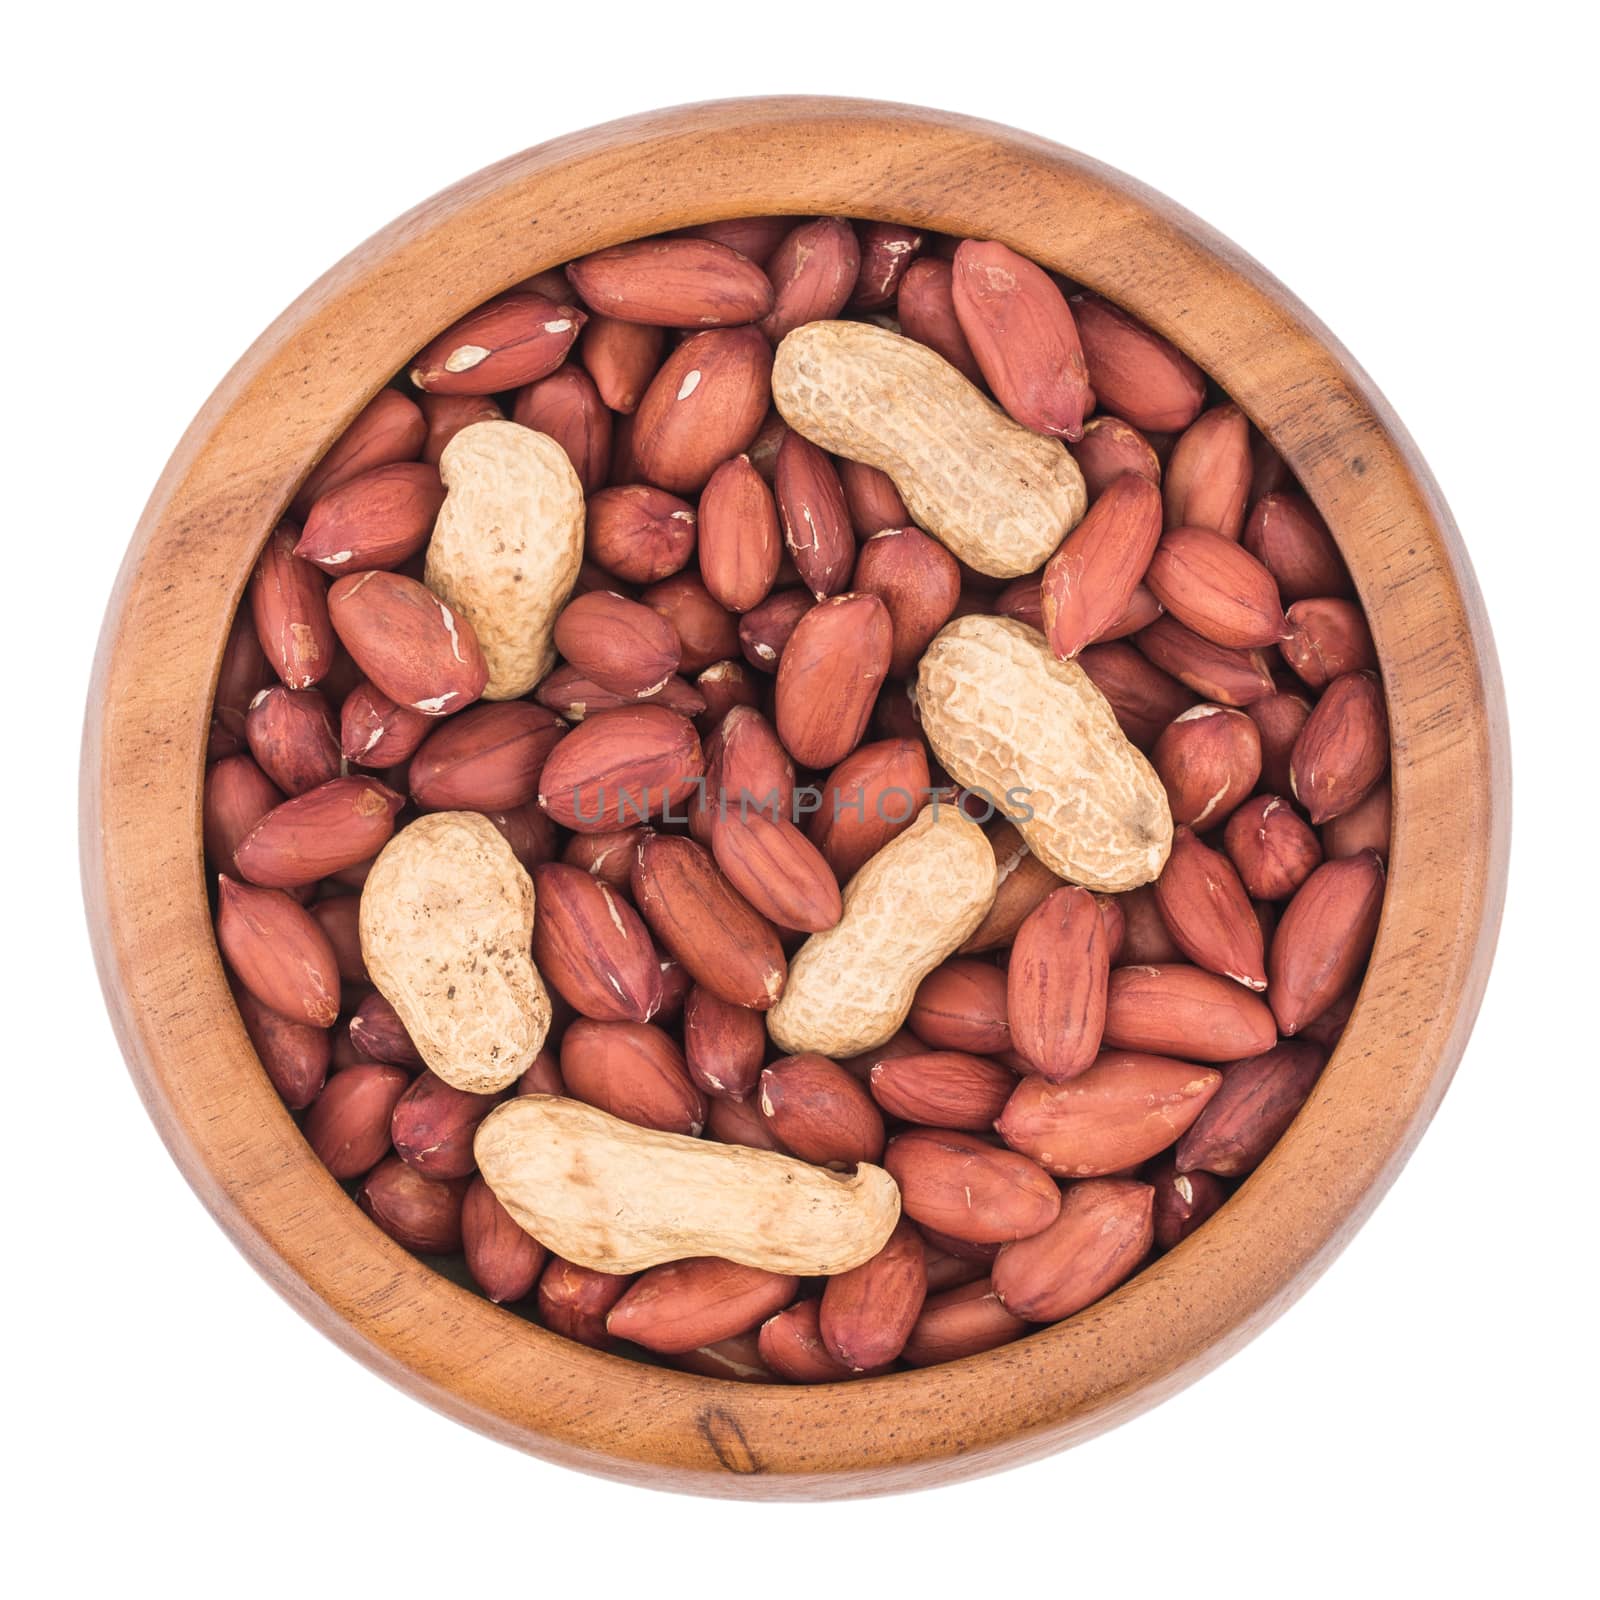 Peanuts in a bowl on a white background.